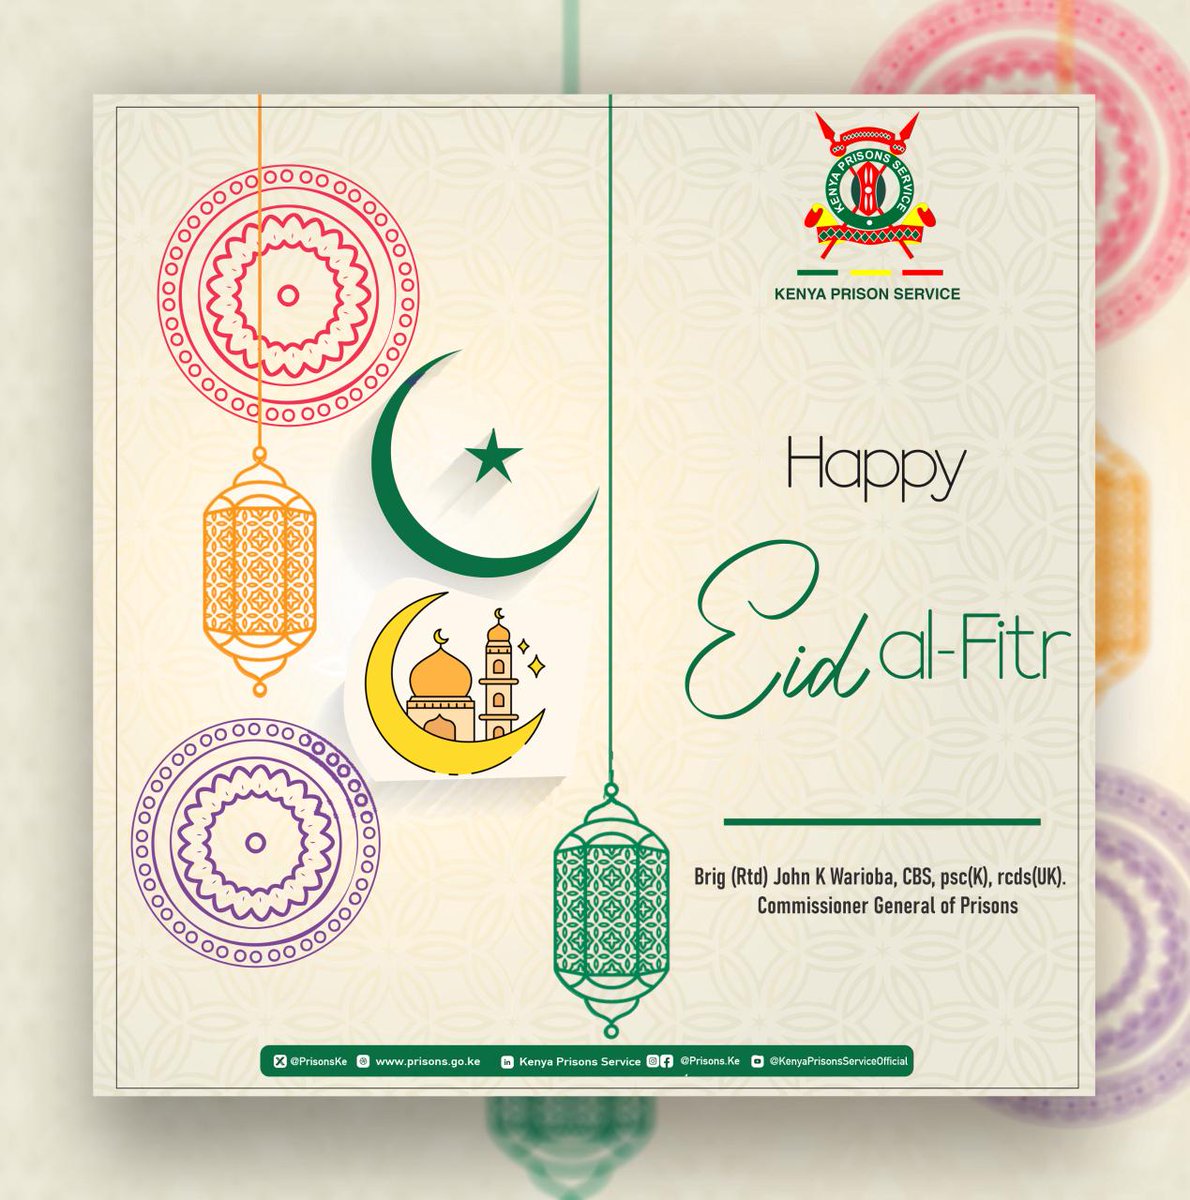 Wishing all our brothers and Sisters Eid Mubarak.May Allah grant you all your wishes give you Peace, Kindness, Hope, Faith and happiness.